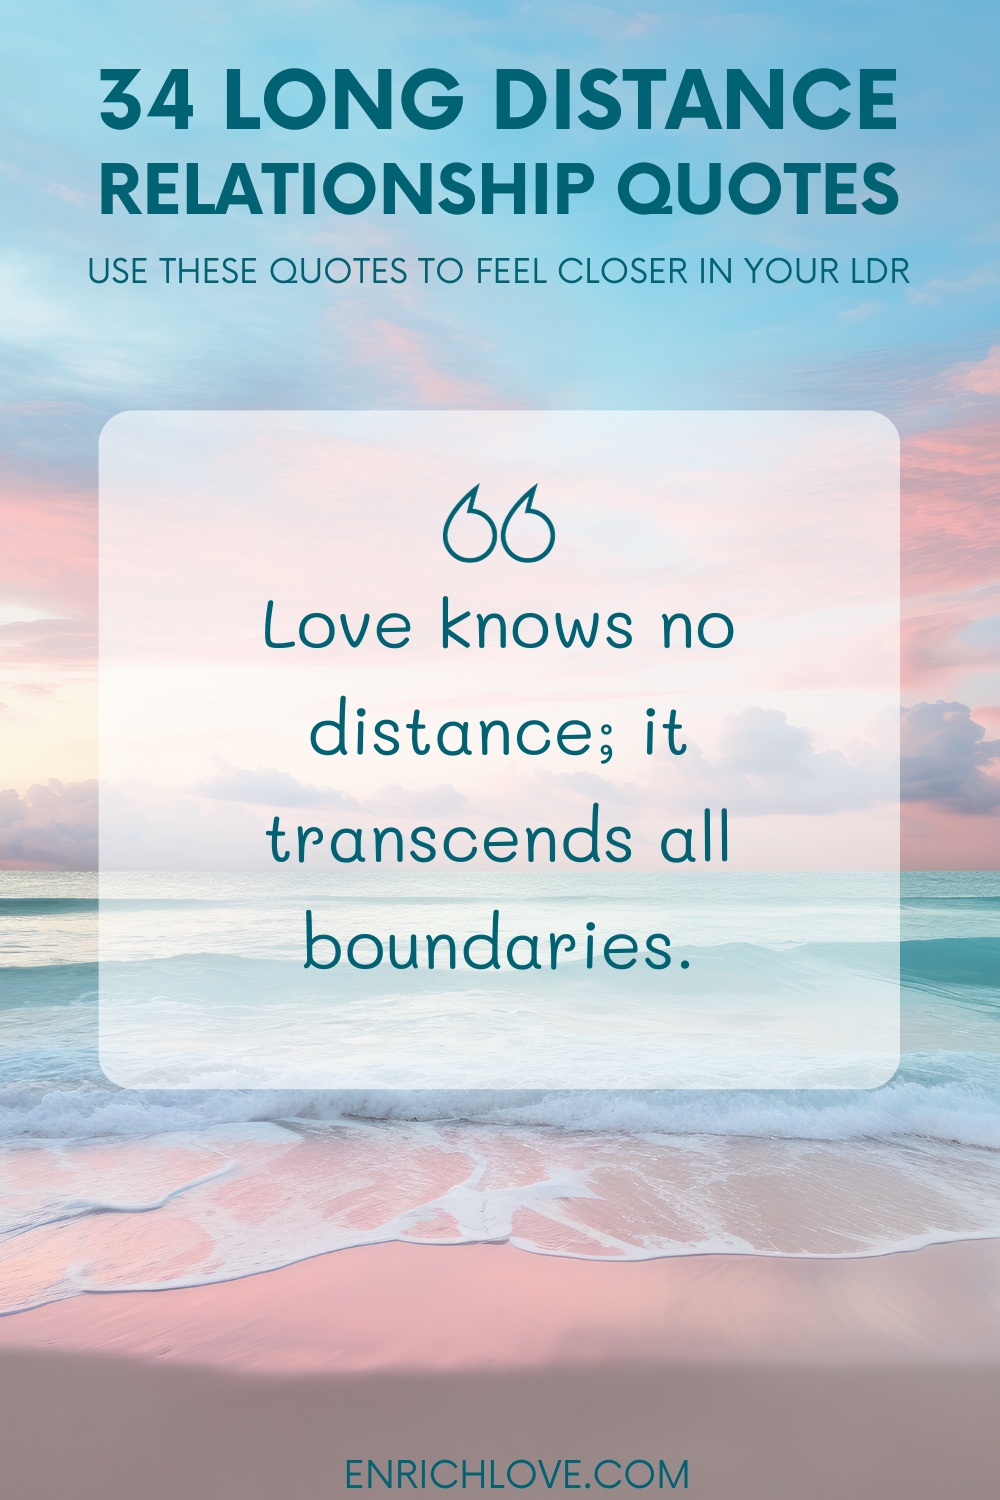 34 Long Distance Relationship Quotes - Love knows no distance; it transcends all boundaries.